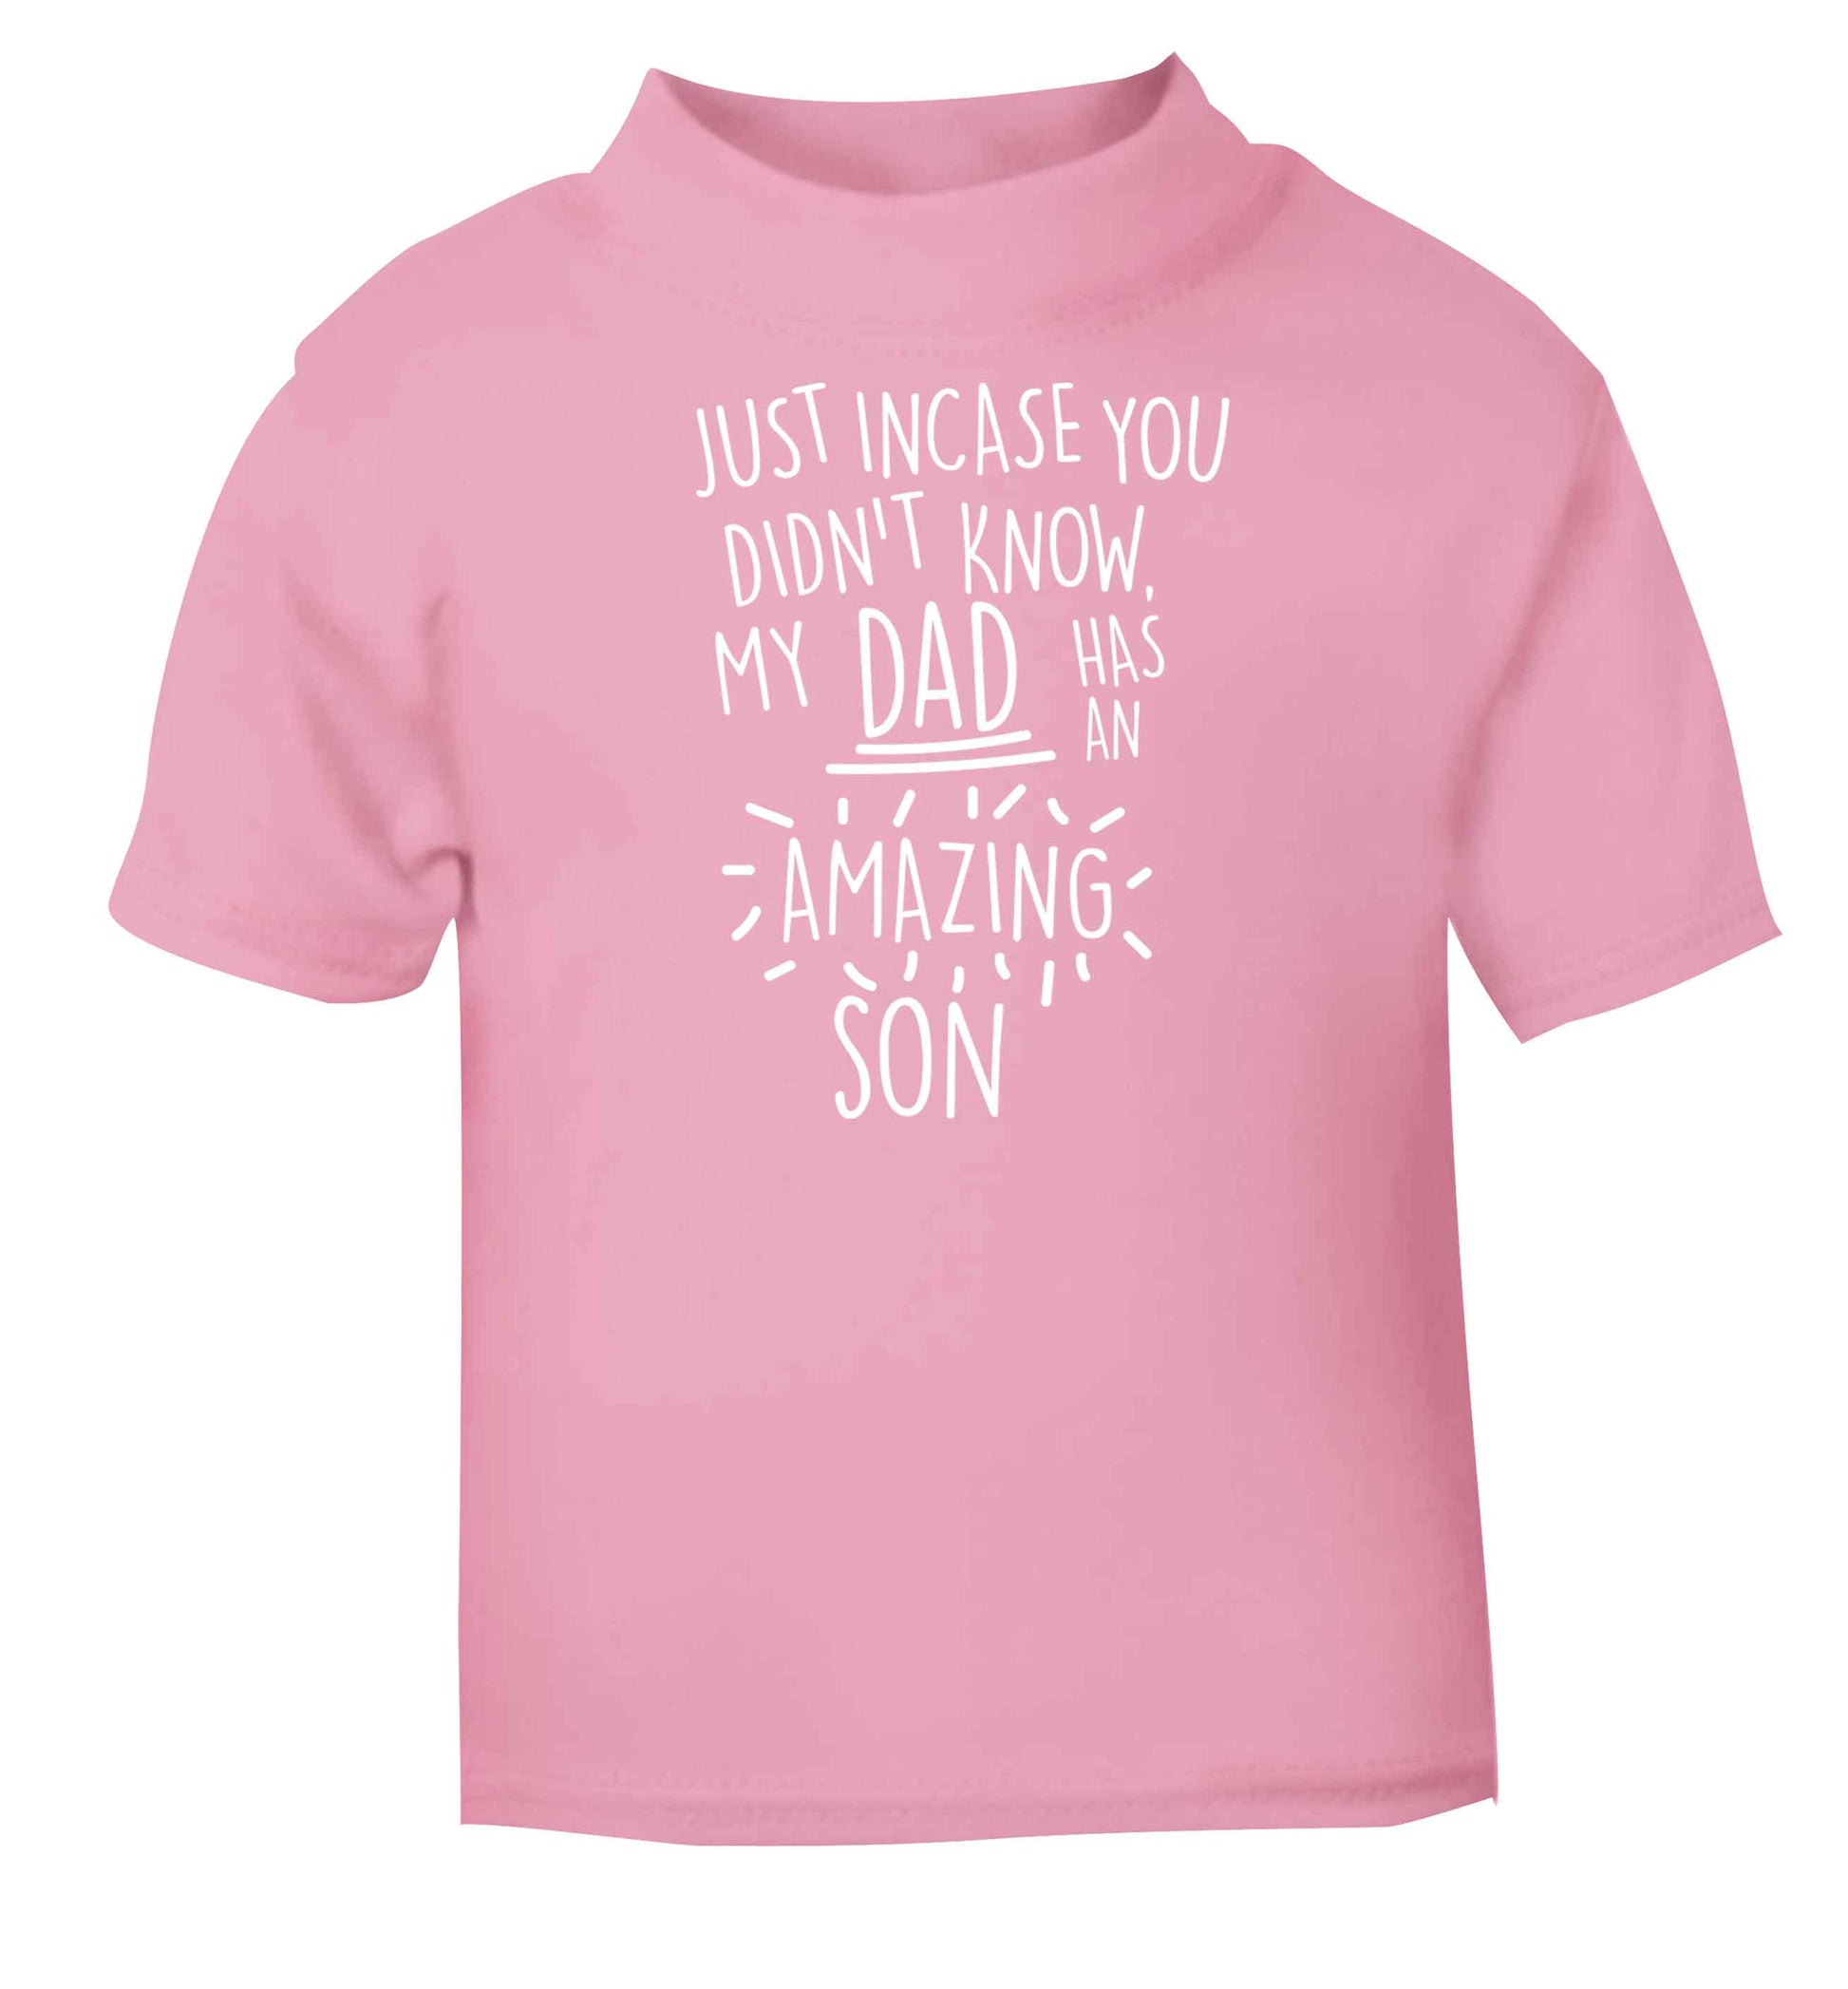 Just incase you didn't know my dad has an amazing son light pink baby toddler Tshirt 2 Years